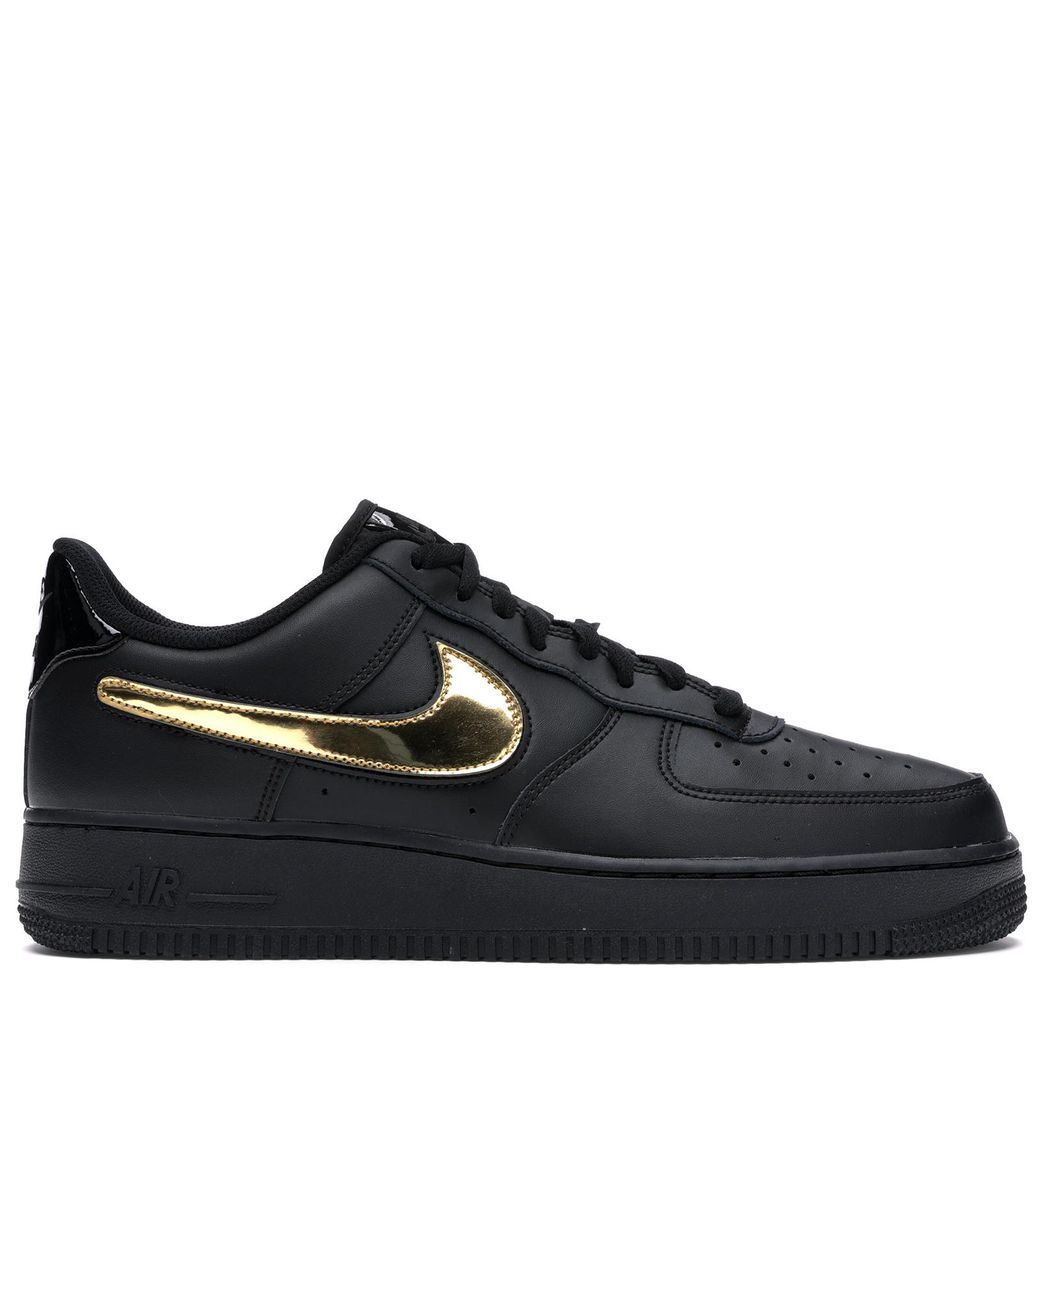 air force 1 black metallic gold removable swoosh pack